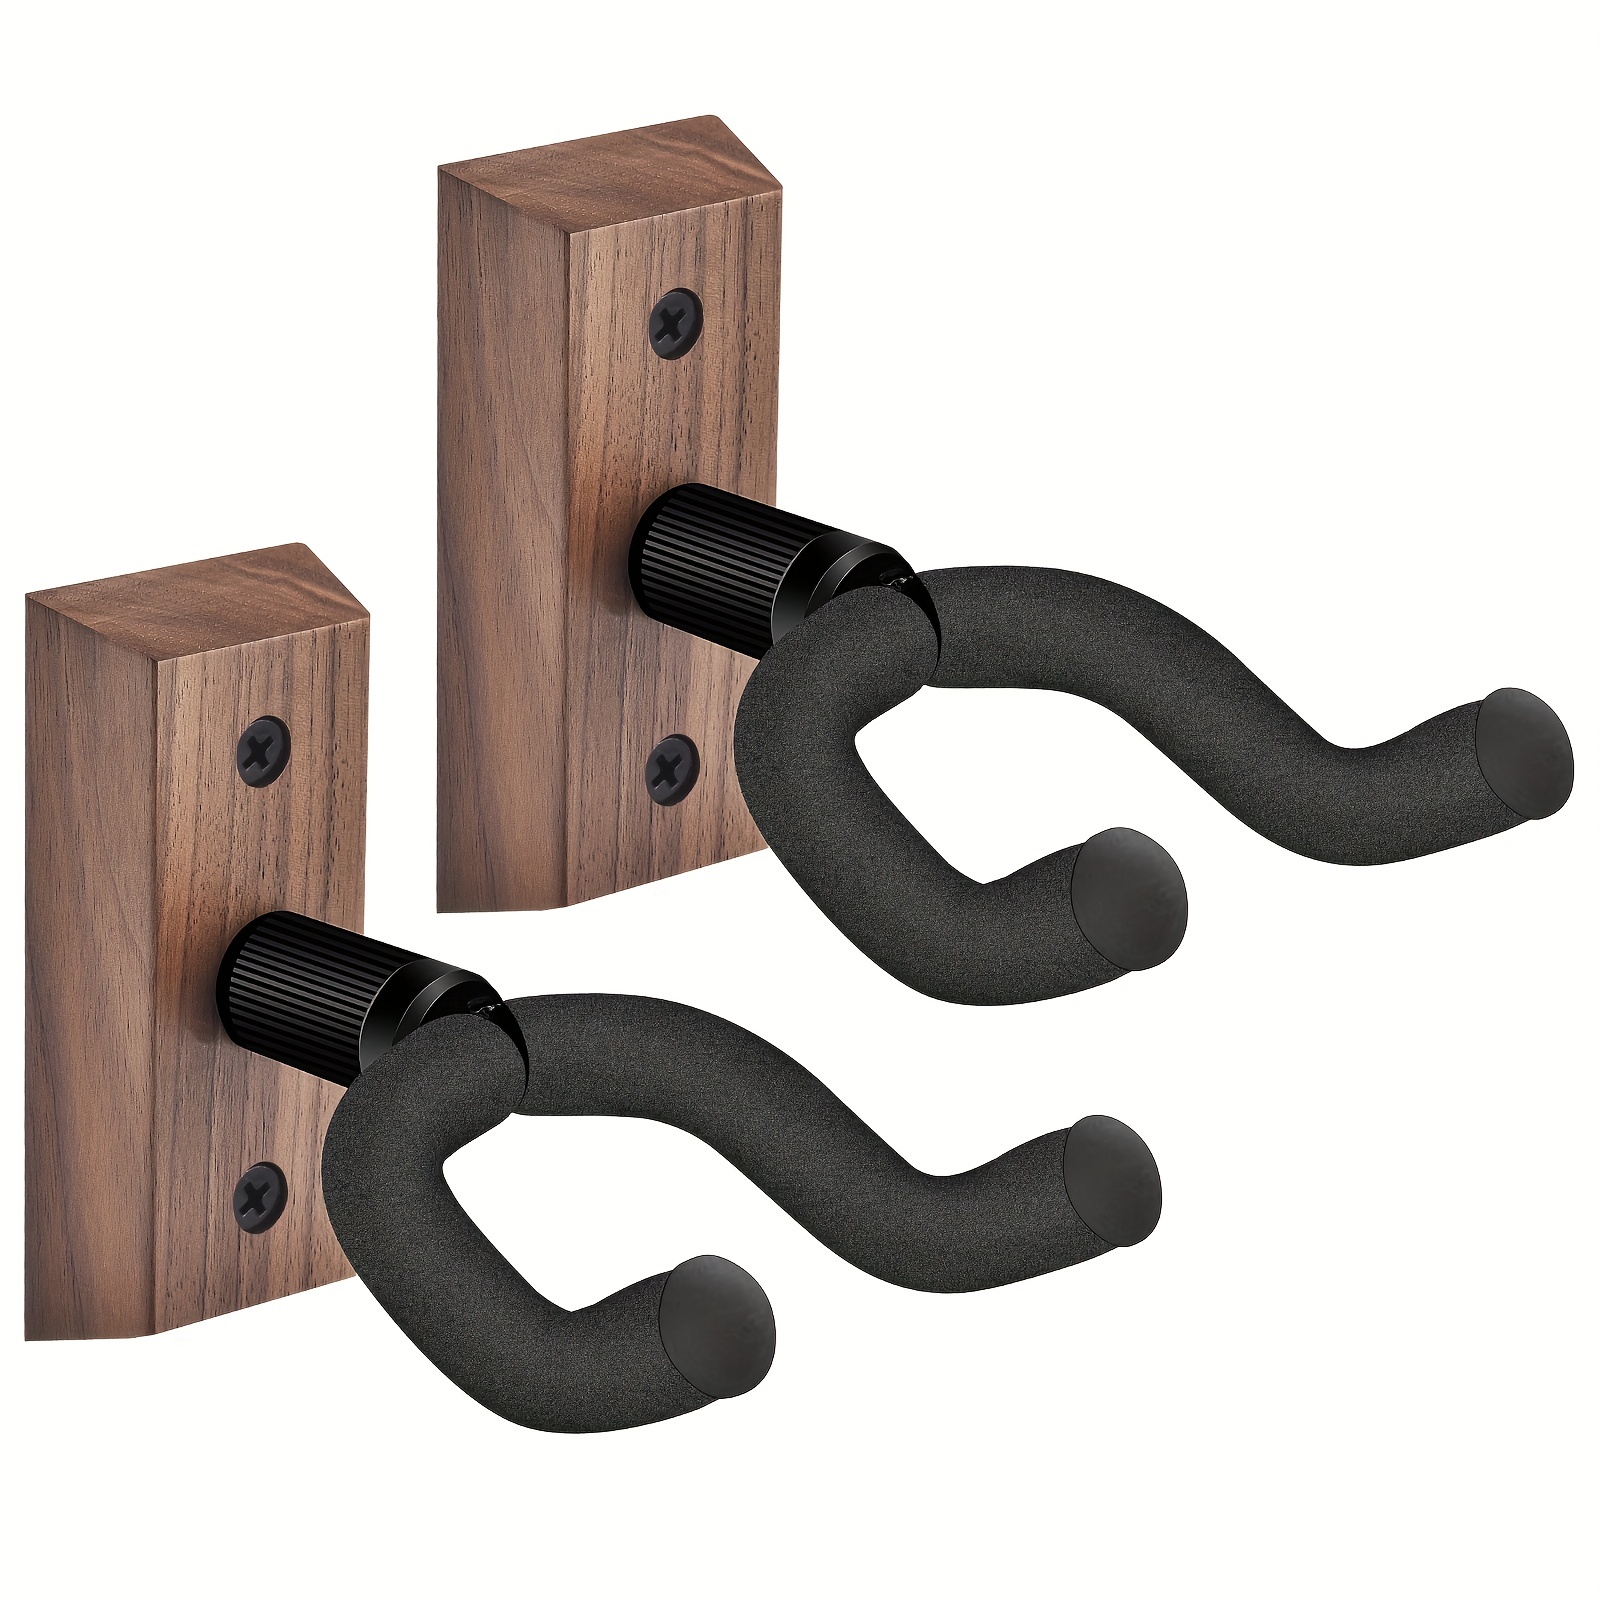 Guitar Wall Mount 3 Pack, Guitar Hanger with Rotatable Soft Hook for All  Size Guitars, Black Walnut Hardwood U-Shaped Guitar Holder Wall Mount for  Aco